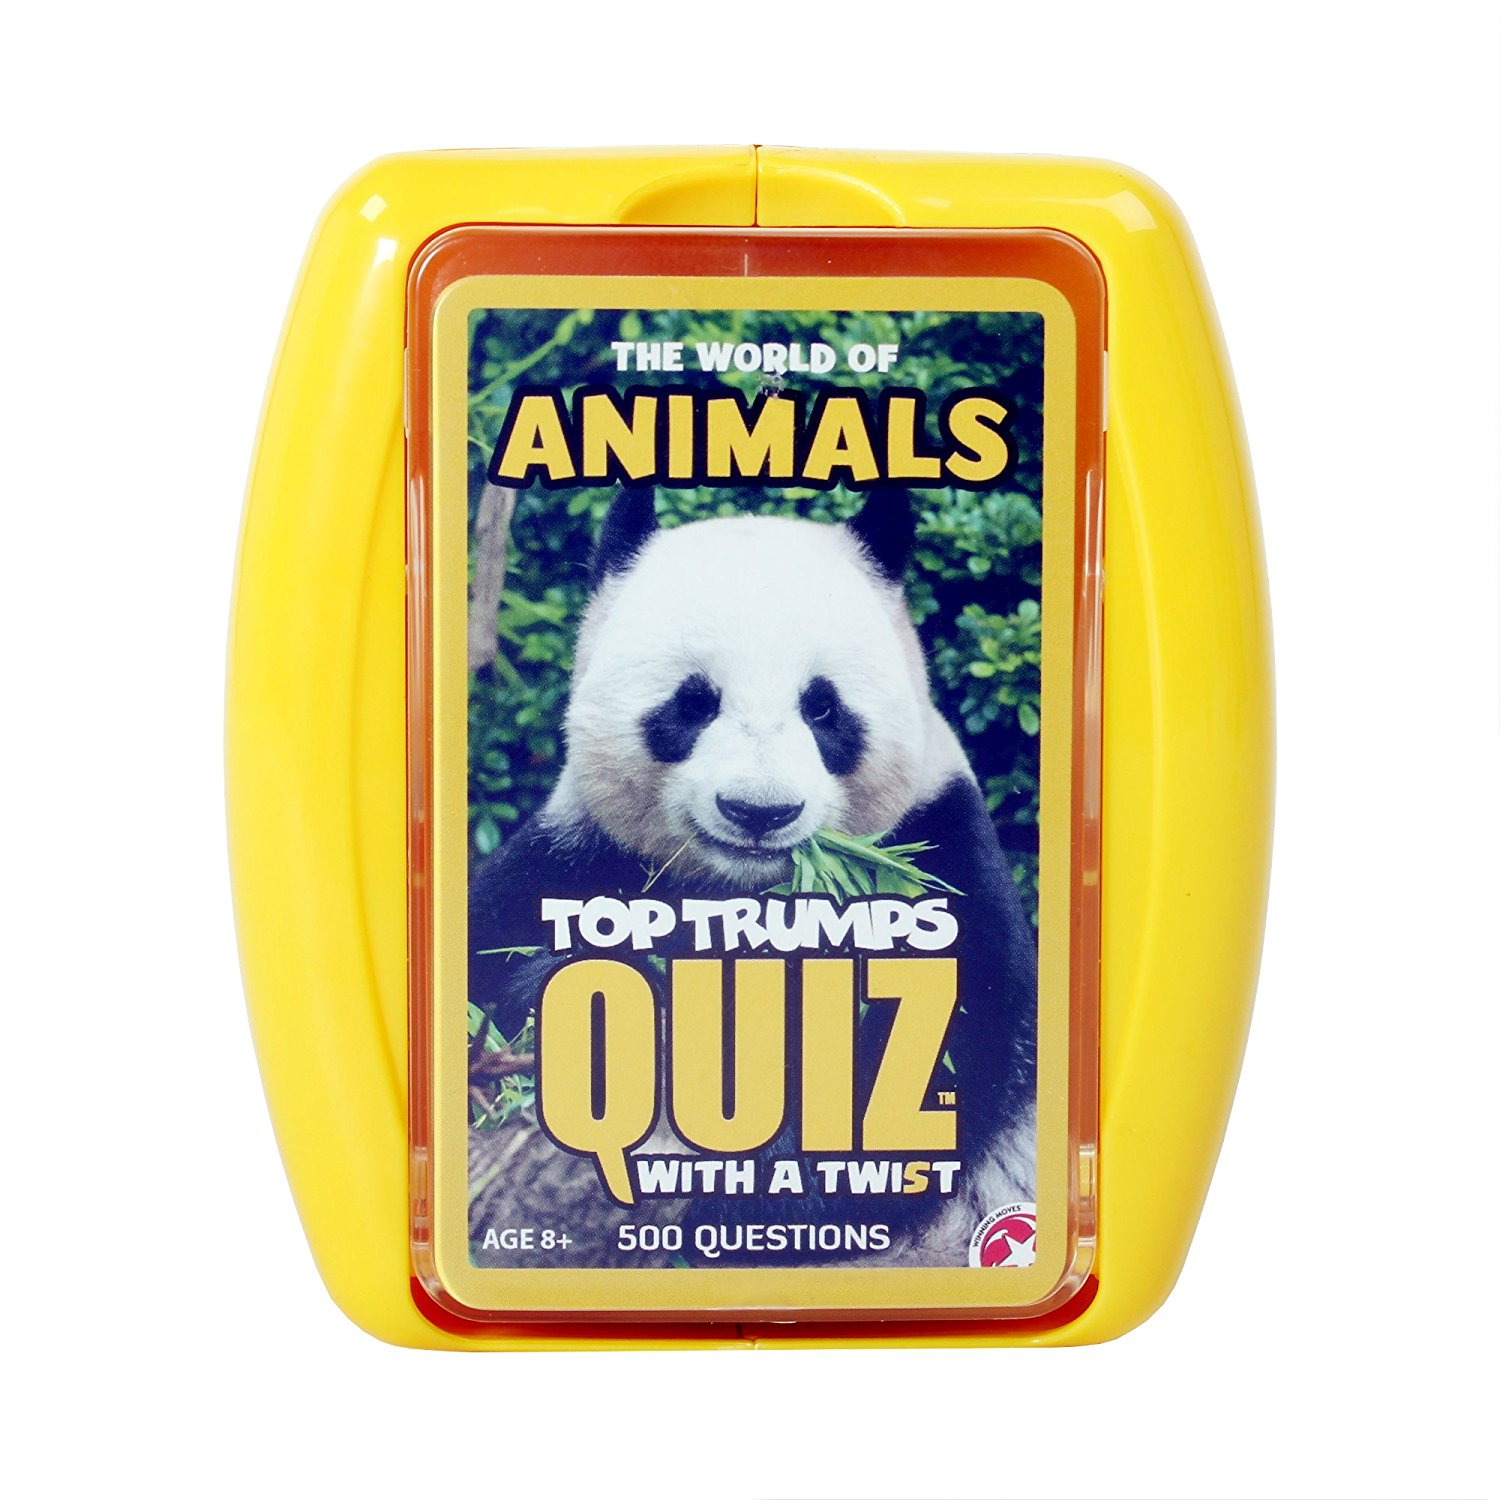 The World of Animals 'Top Trumps Quiz' Card Game